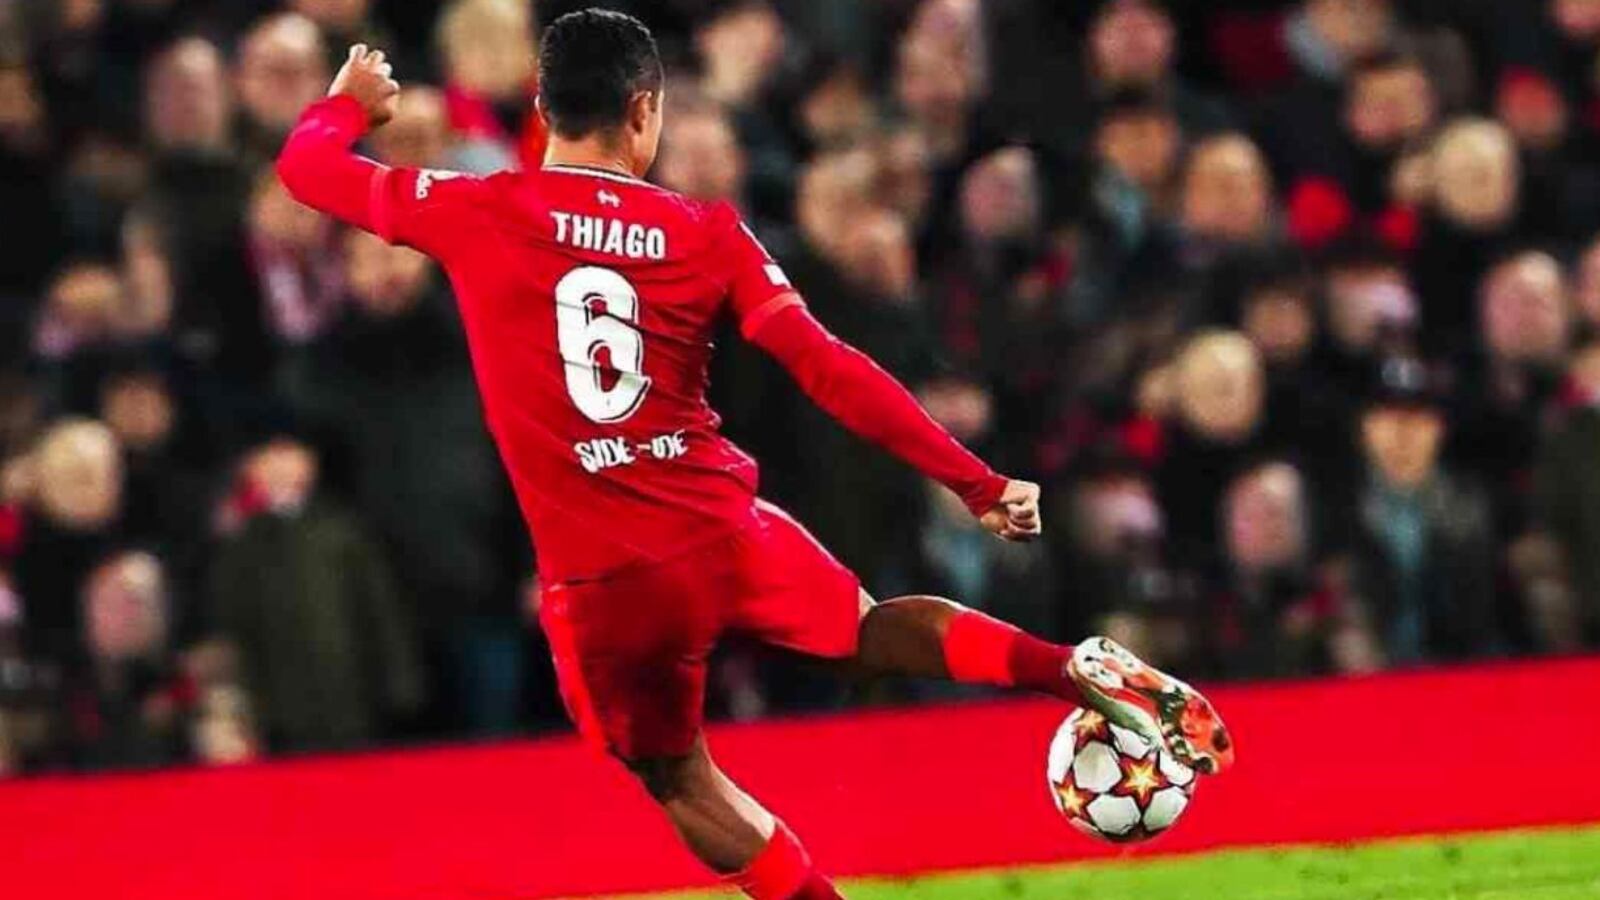 When is Thiago Alcantara going back to play for Liverpool? Klopp's assistant has spoken